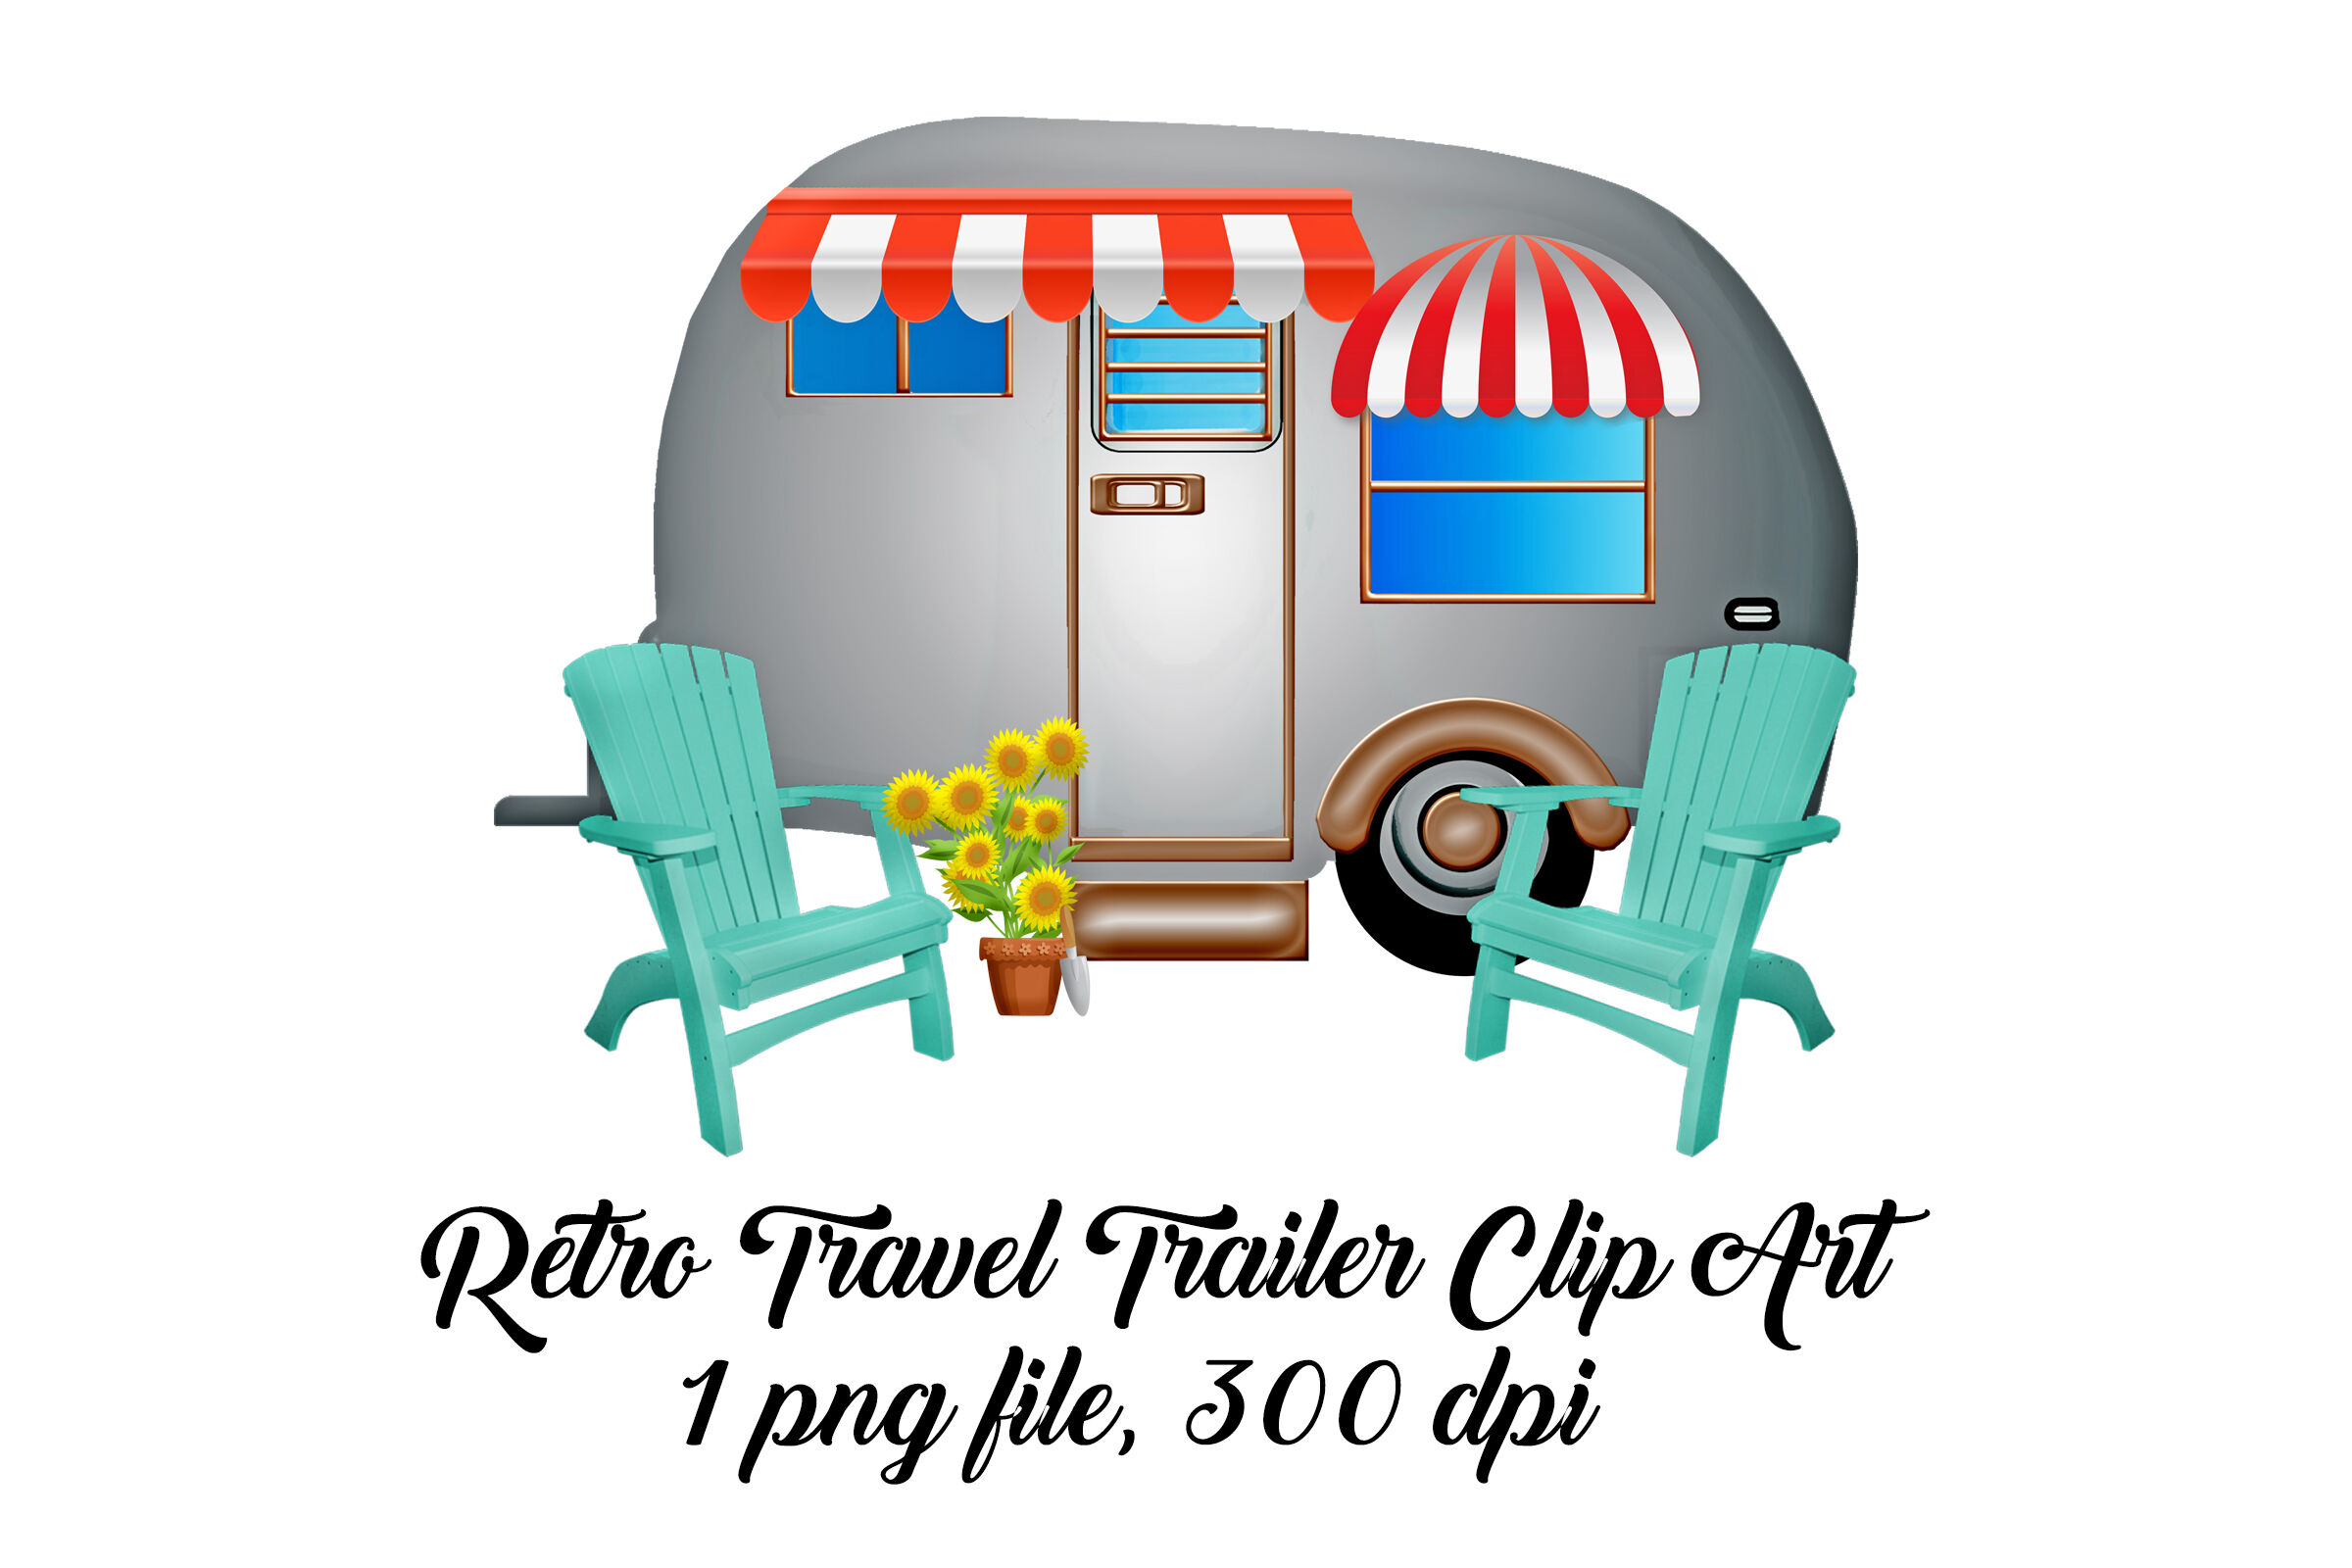 Retro Travel Trailer With Chairs Clip Art By Me And Amelie